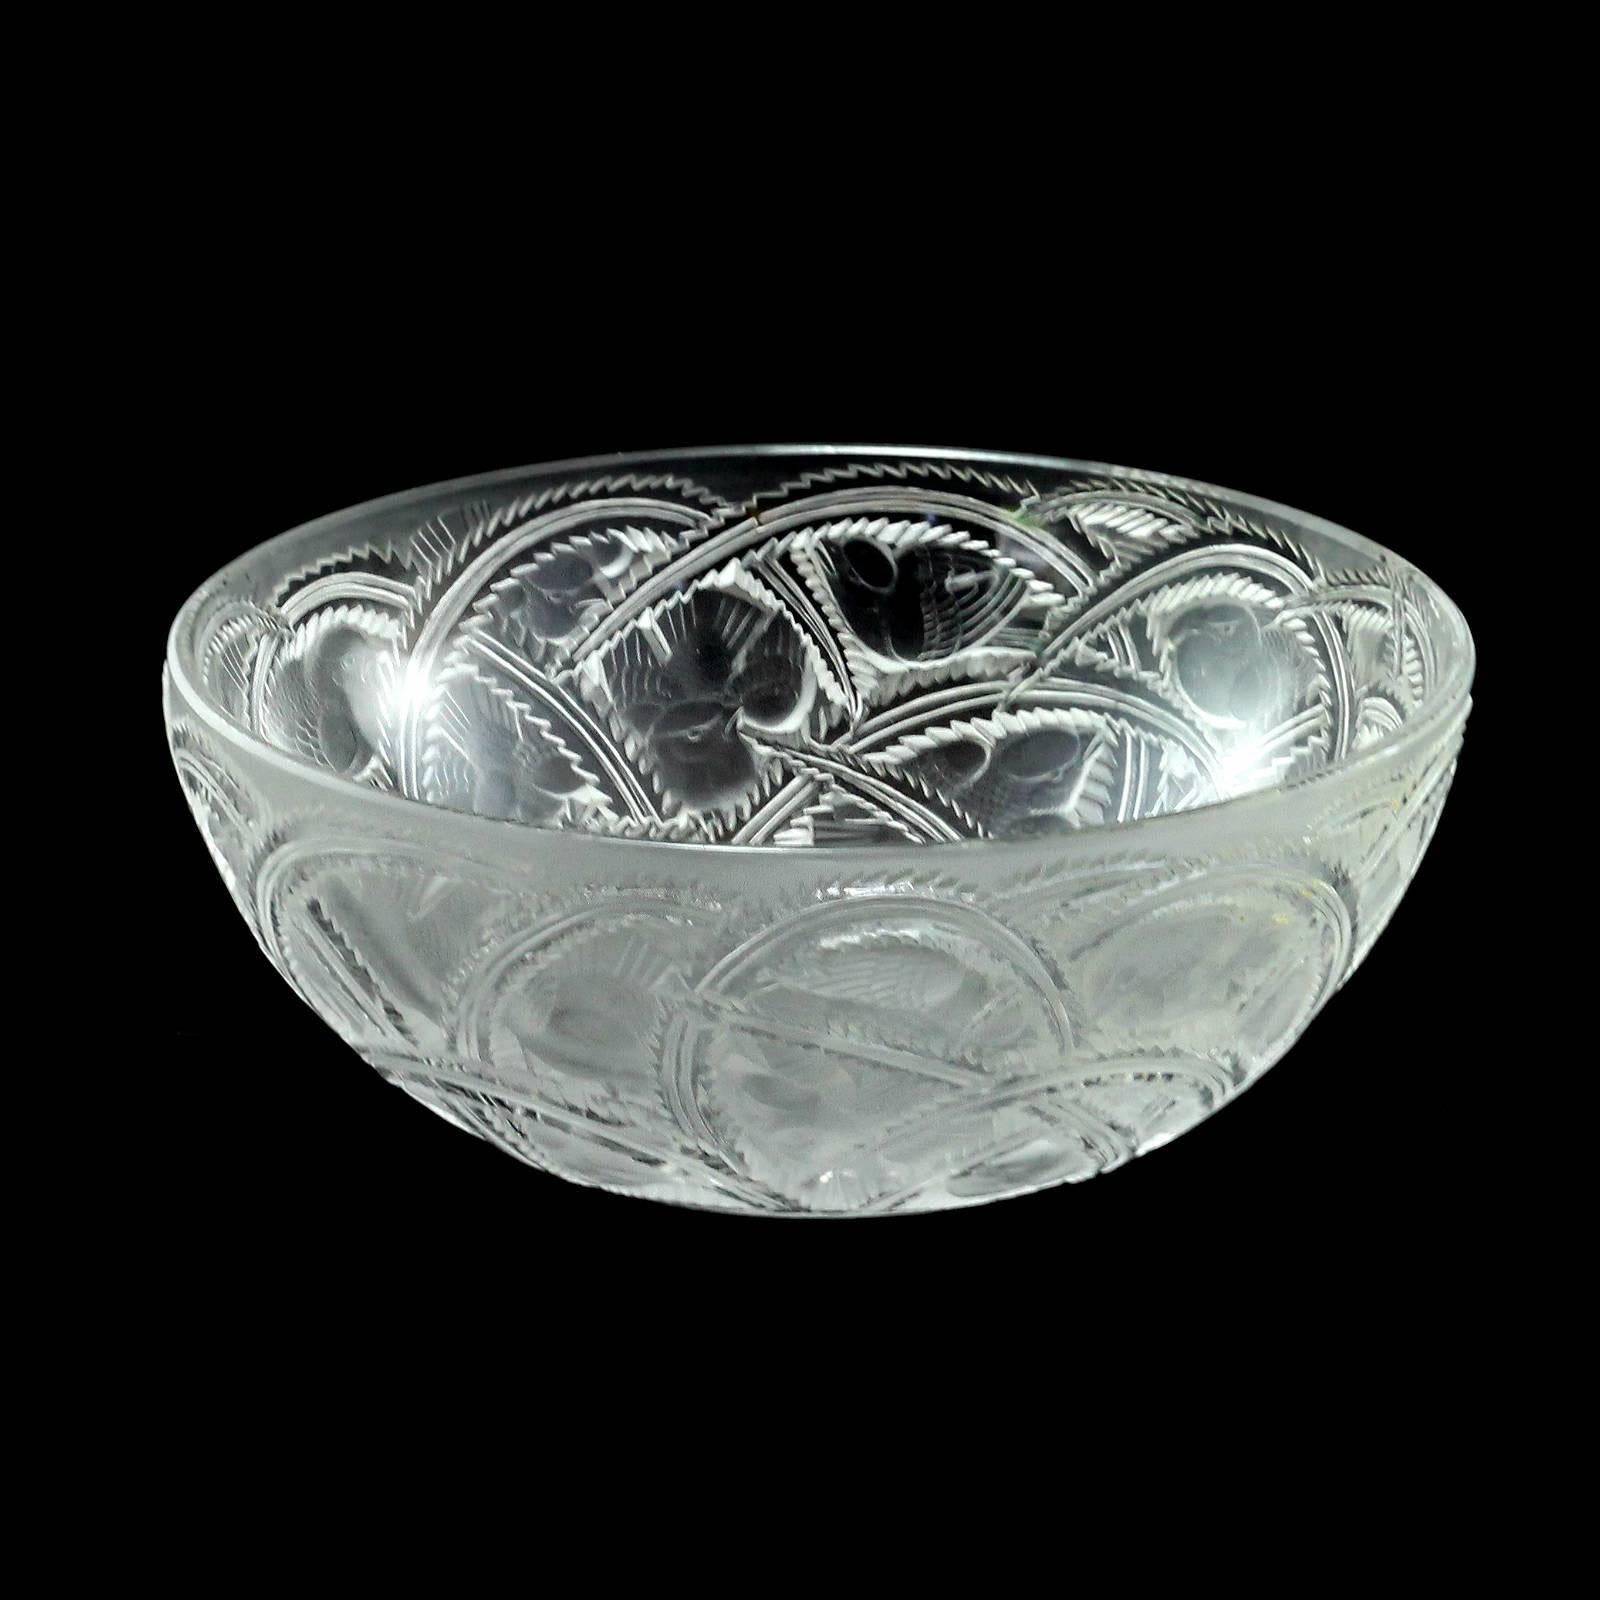 20th century cut crystal bowl in the 'Pinsons' pattern by Lalique. The piece is decorated with sparrows among foliage, and is stamped 'Lalique France'.